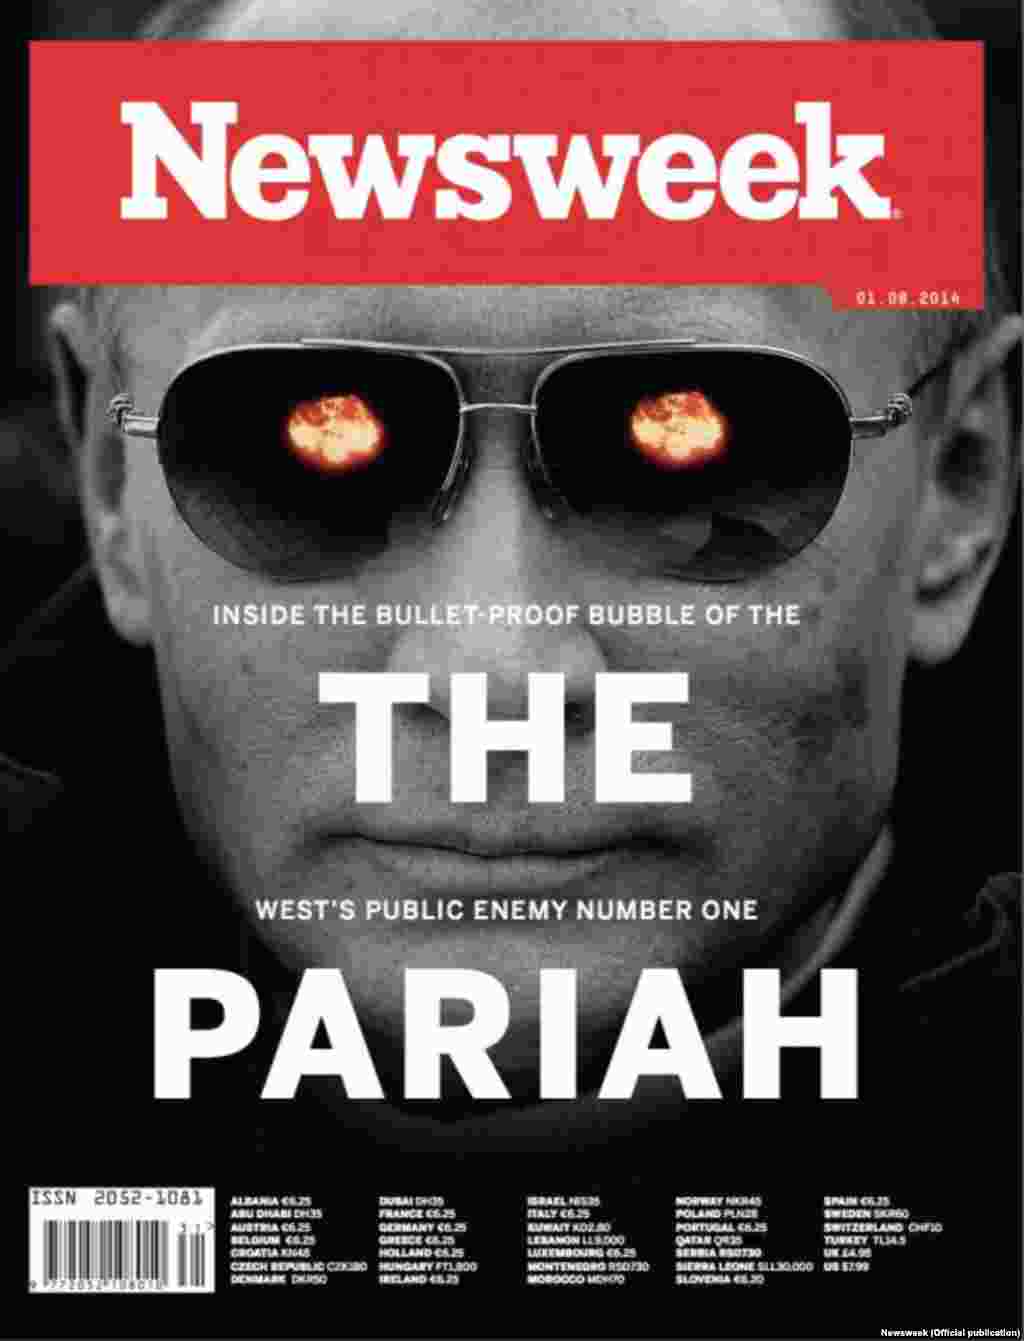 For "Newsweek," Putin is the "West's public enemy number one."